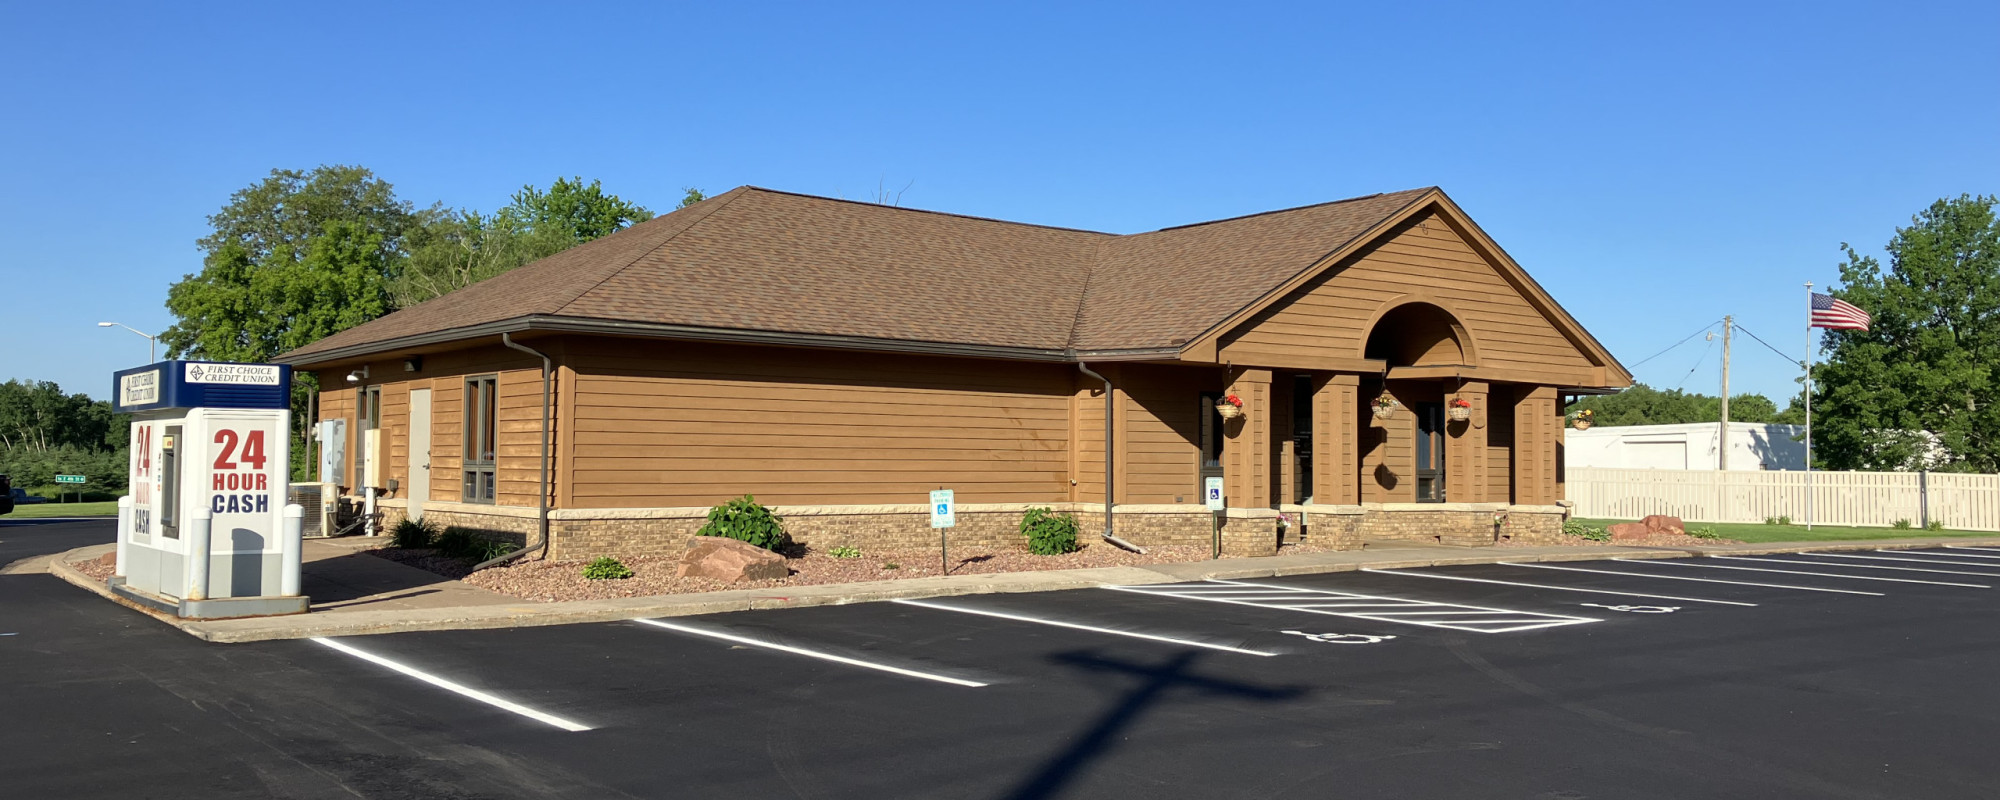 Image of First Choice Credit Union' building